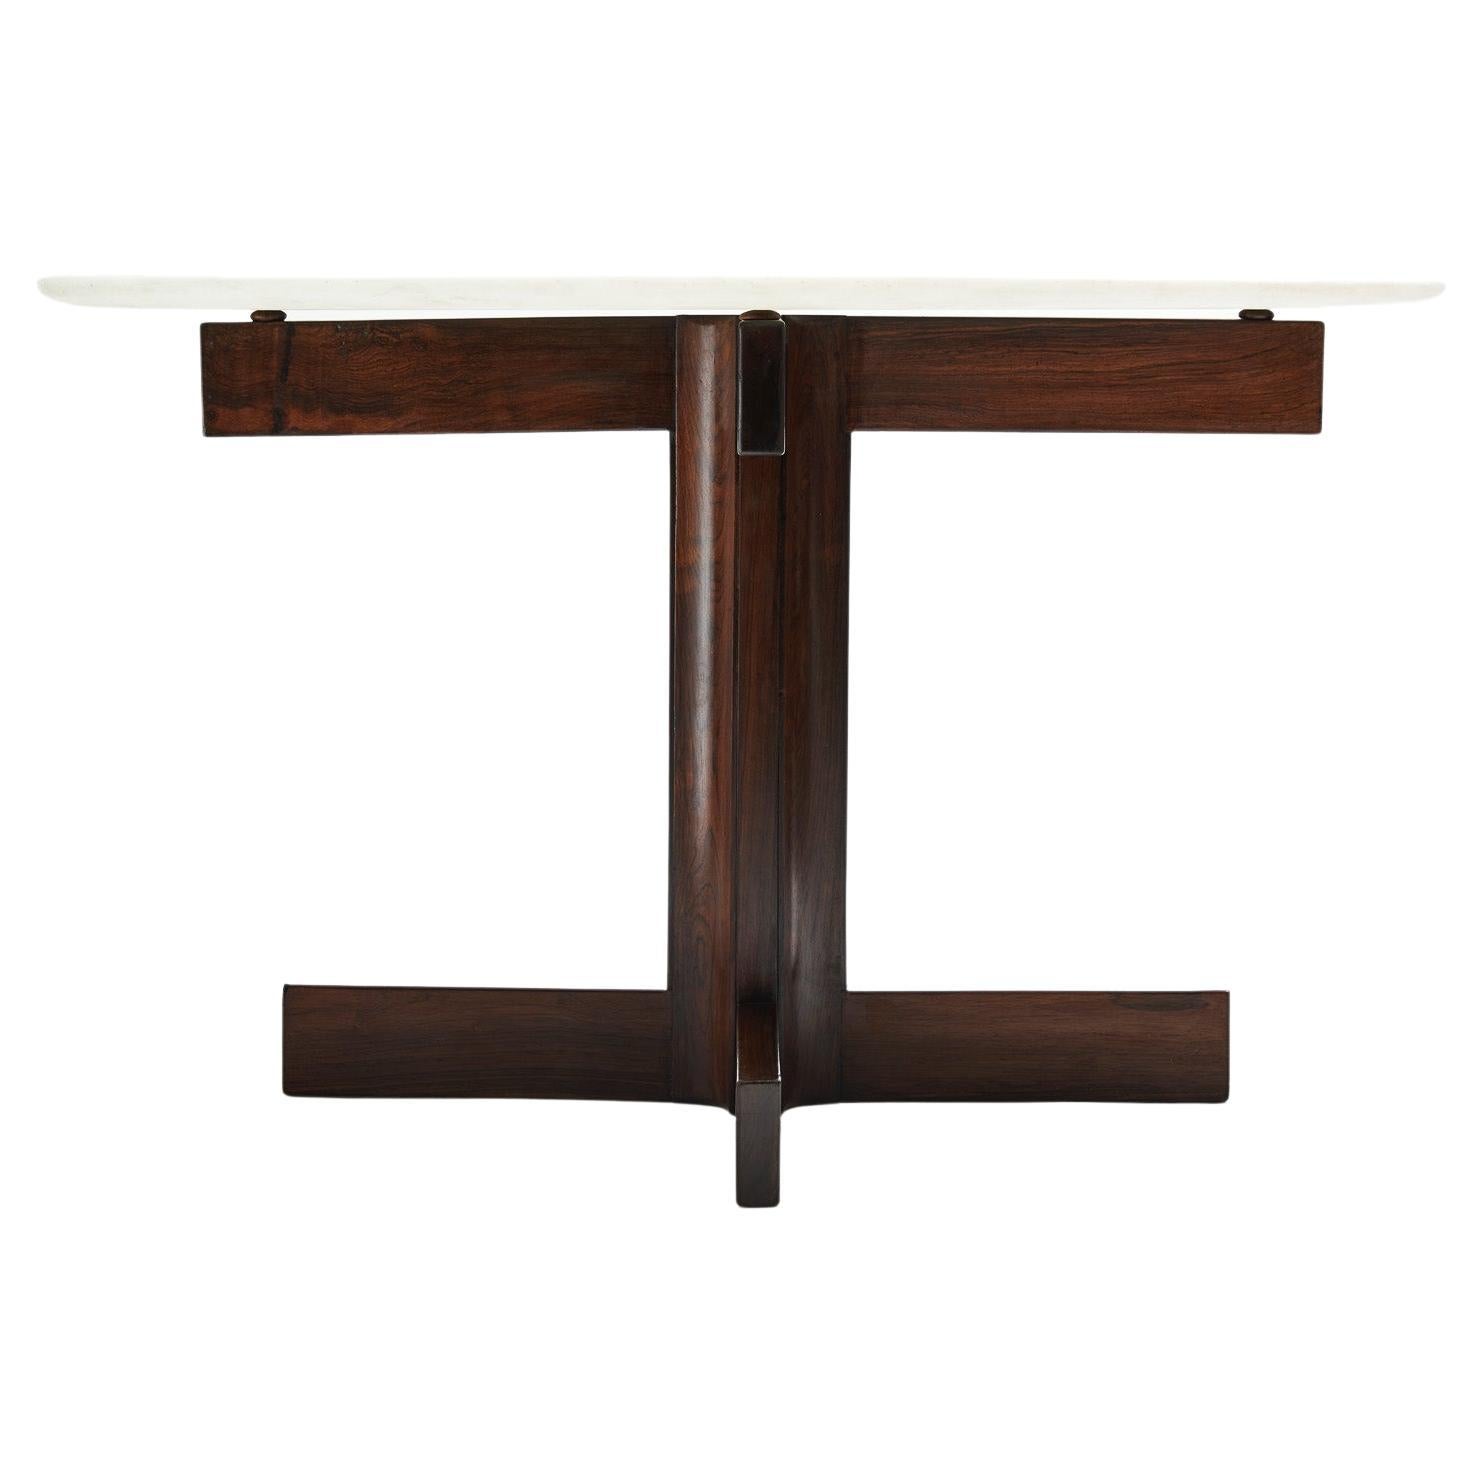 Available now, this Midcentury Modern Round Dining Table in Hardwood & Marble designed by Celina, in 1960’s Brazil is a stunning!

This Brazilian Modern beauty is executed in Brazilian Rosewood (as known as Jacaranda) with a 